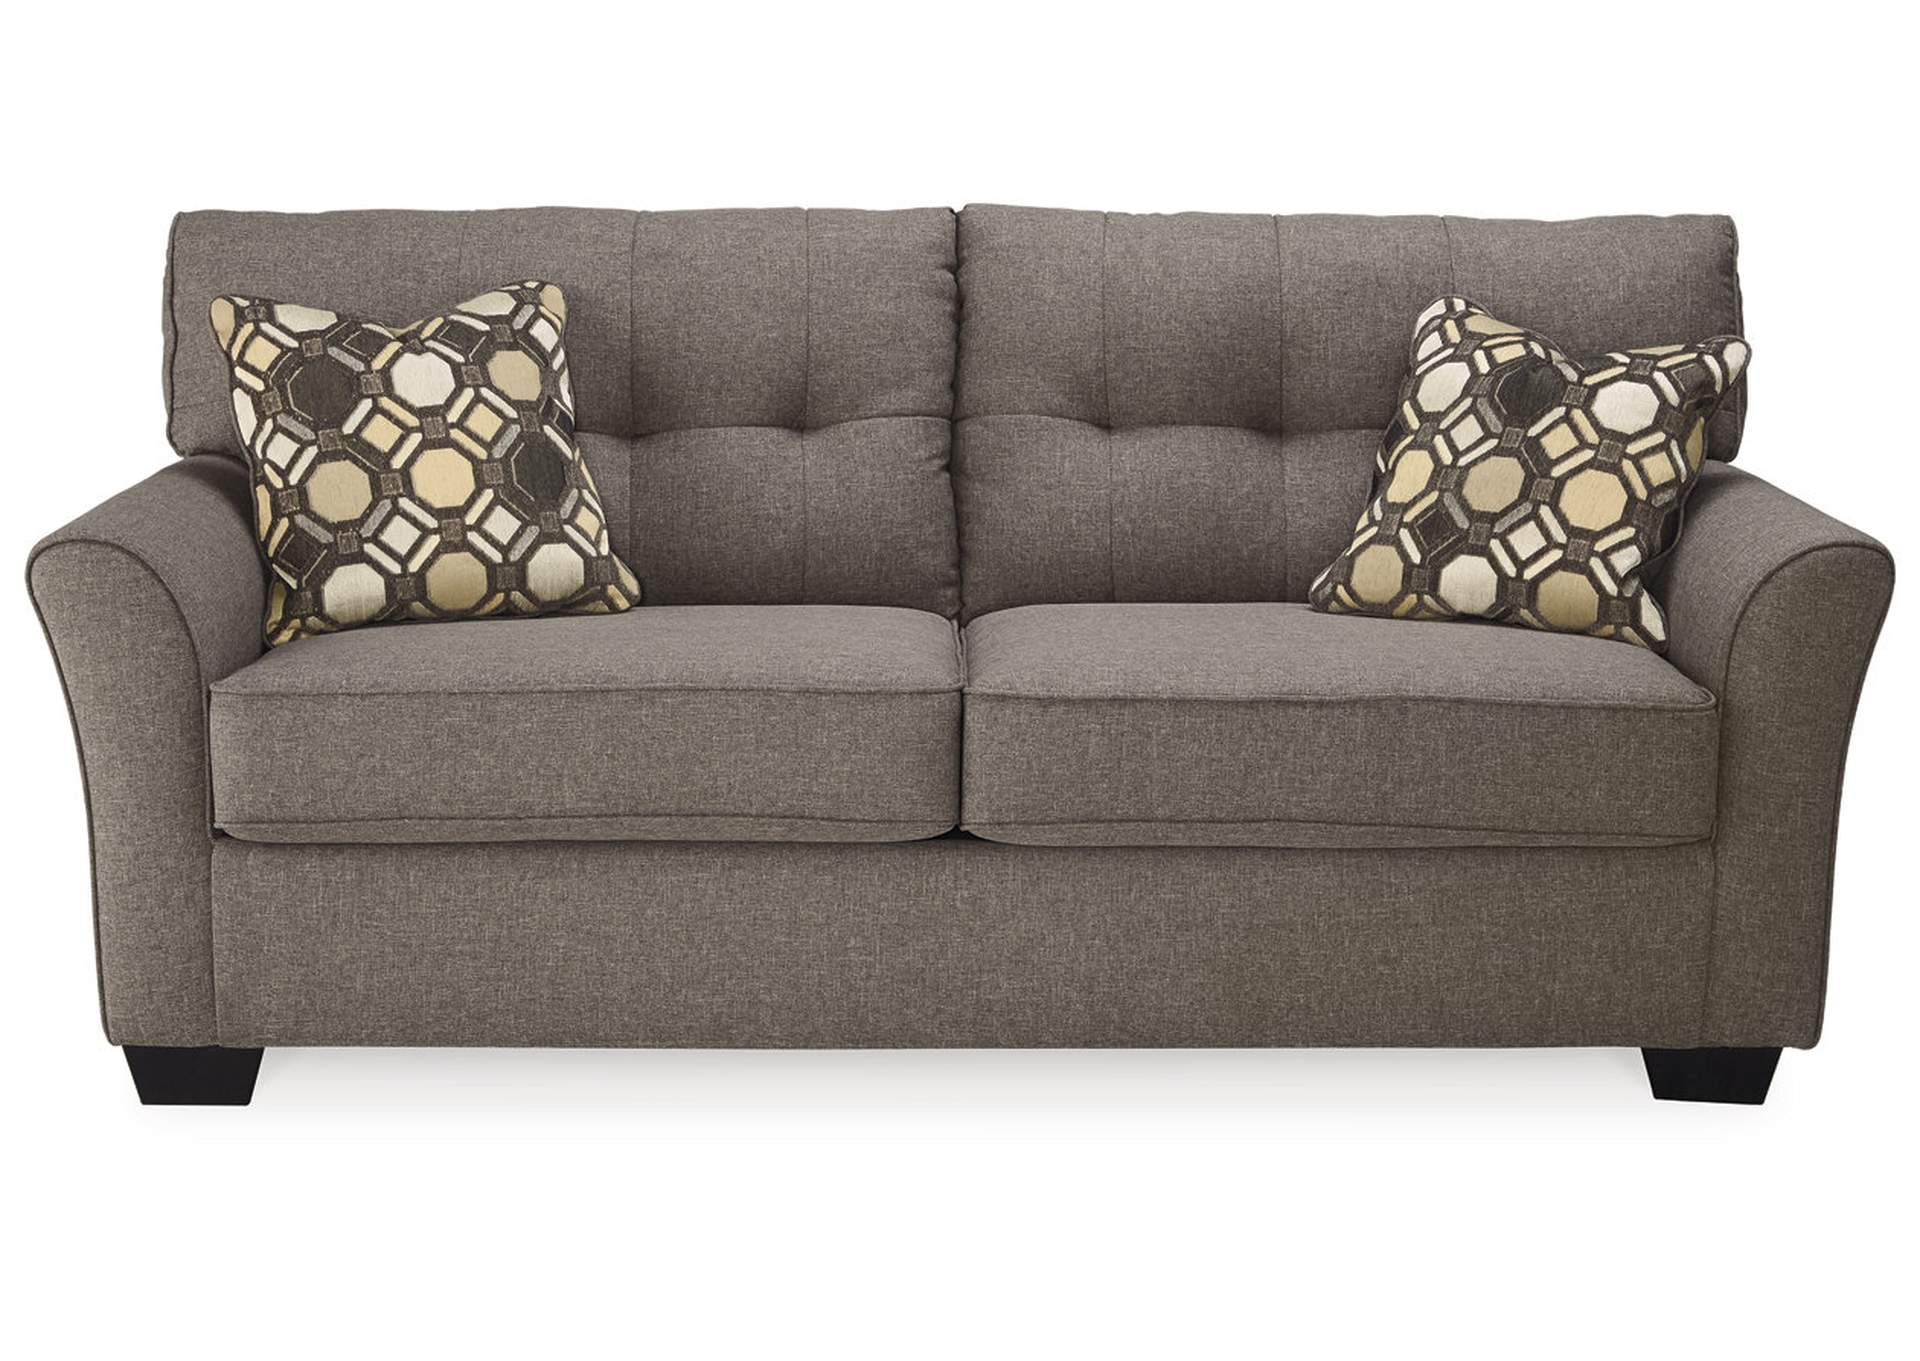 Tibbee Sofa and Loveseat,Signature Design By Ashley